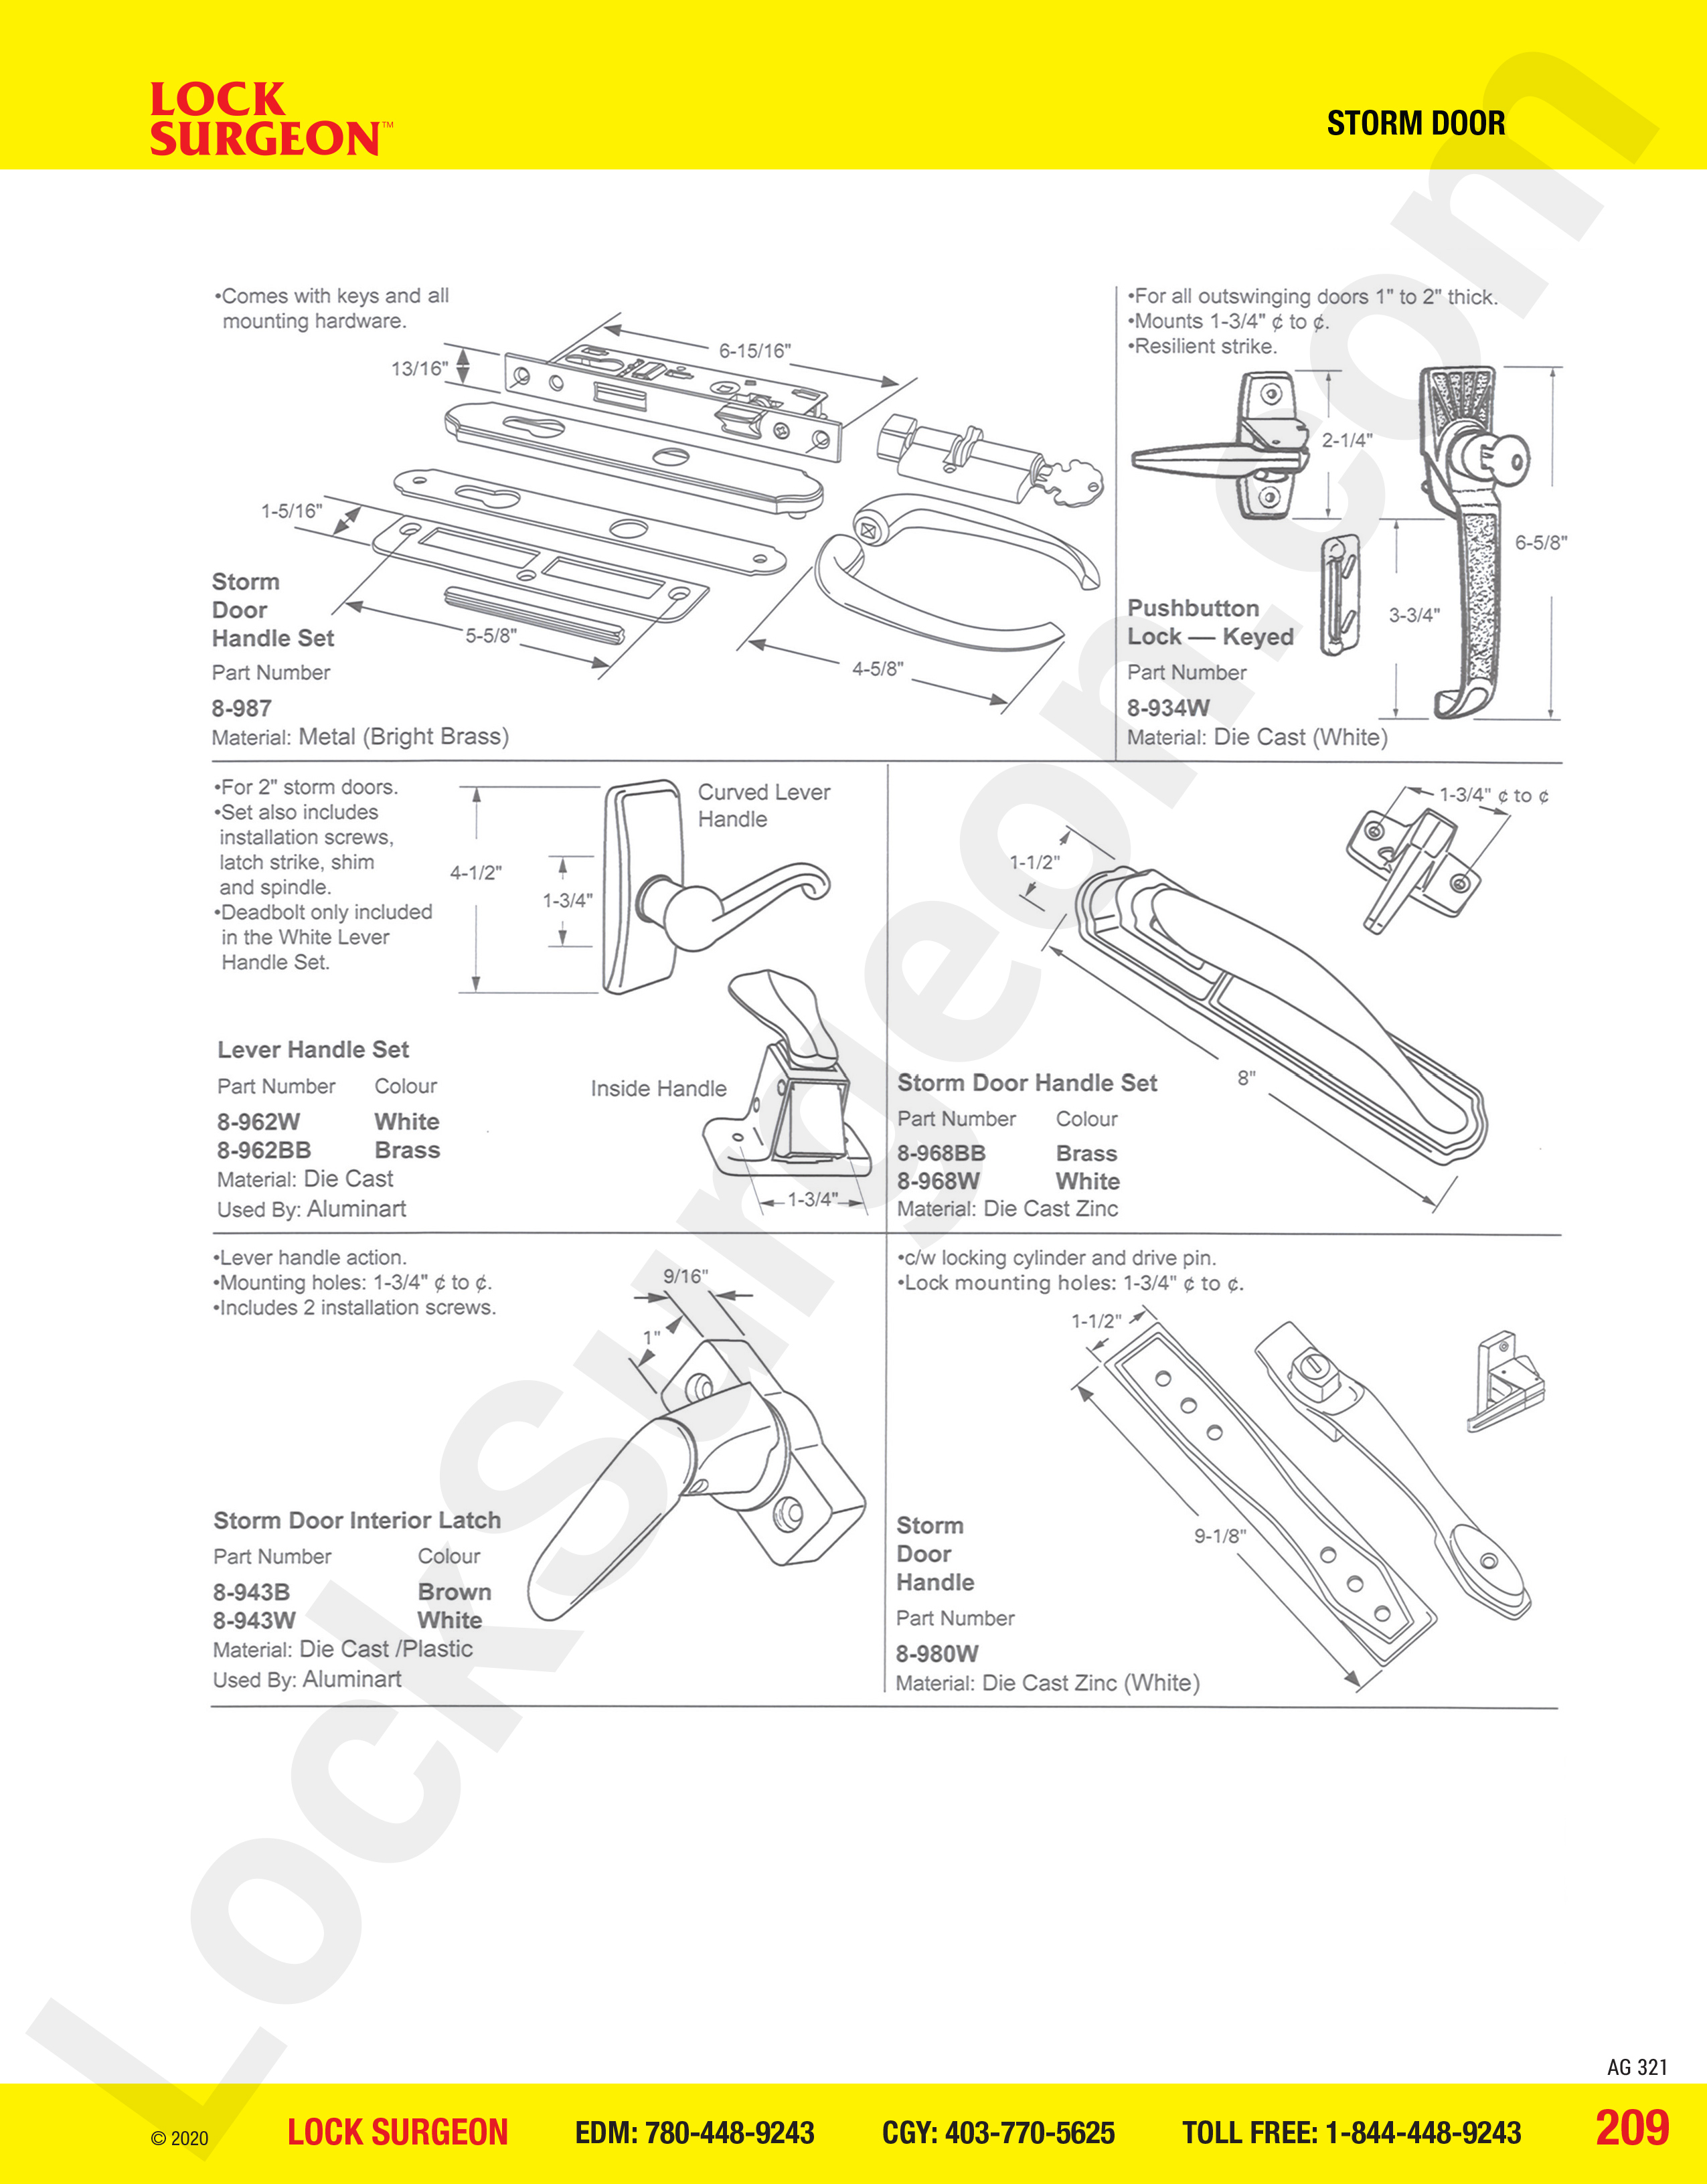 Storm Door handle sets repair or replacement in a variety of shapes and sizes.